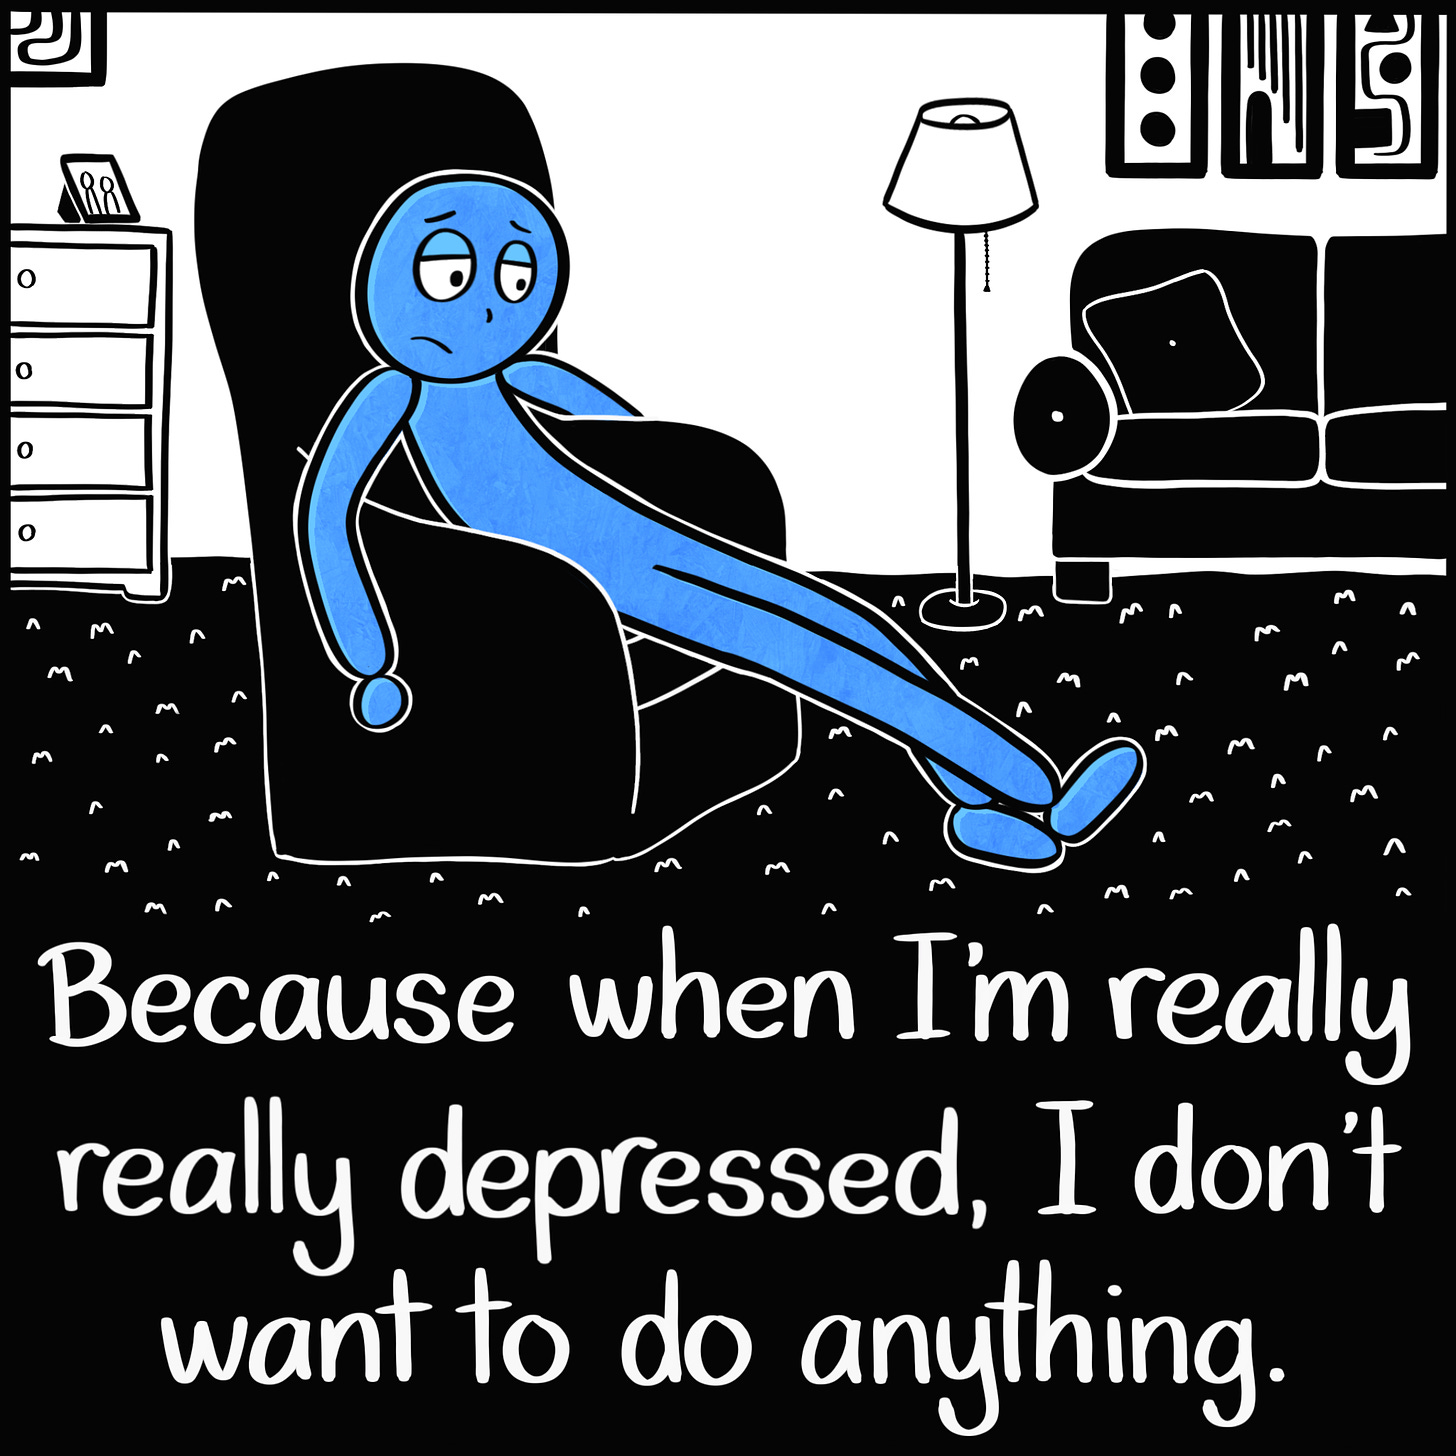 Caption: Because when I'm really really depressed, I don't want to do anything. Image: The Blue Person sitting in an armchair in a living room, slumped over and looking sad. 